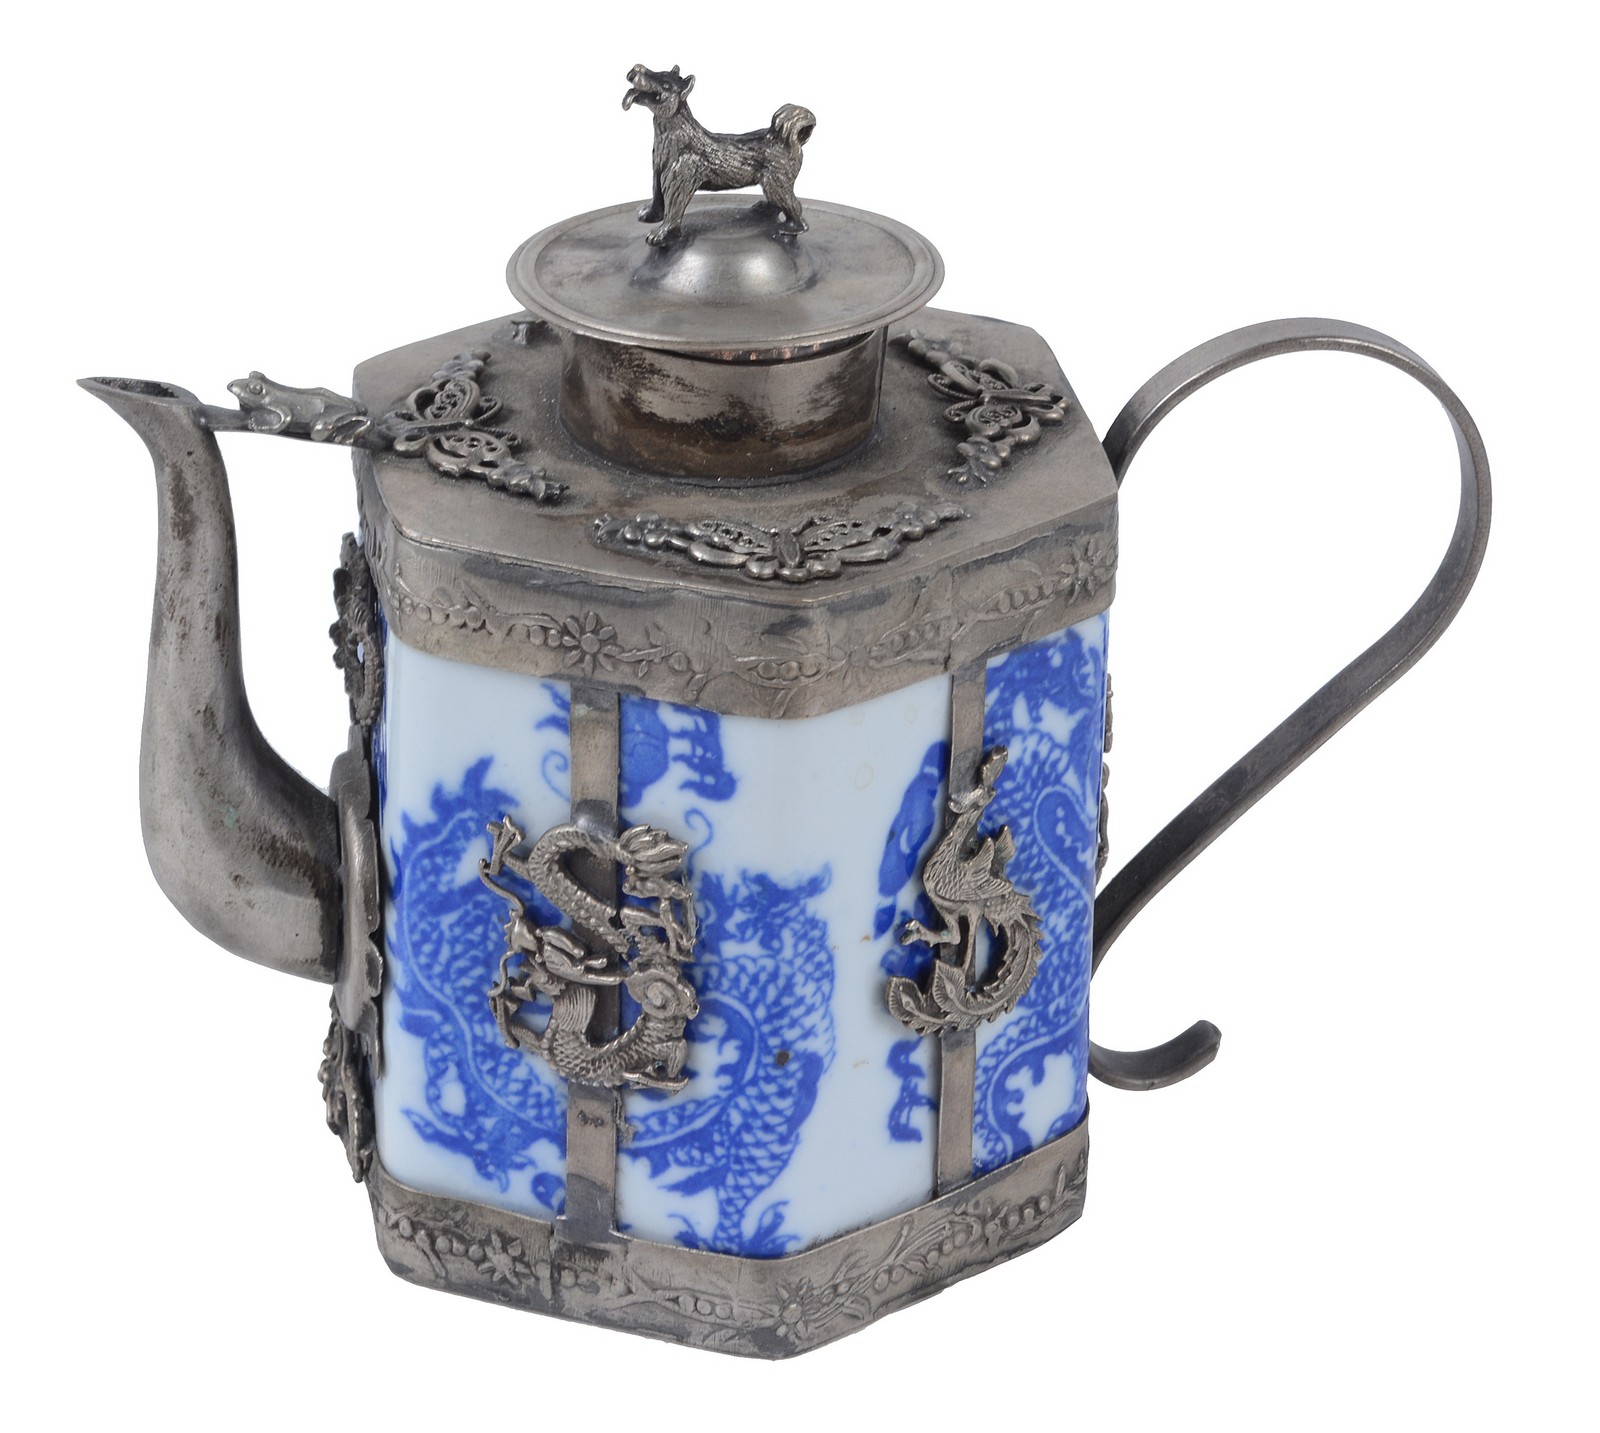 A Chinese transfer printed blue and white teapot with silver metal mounted top, handle and spout,